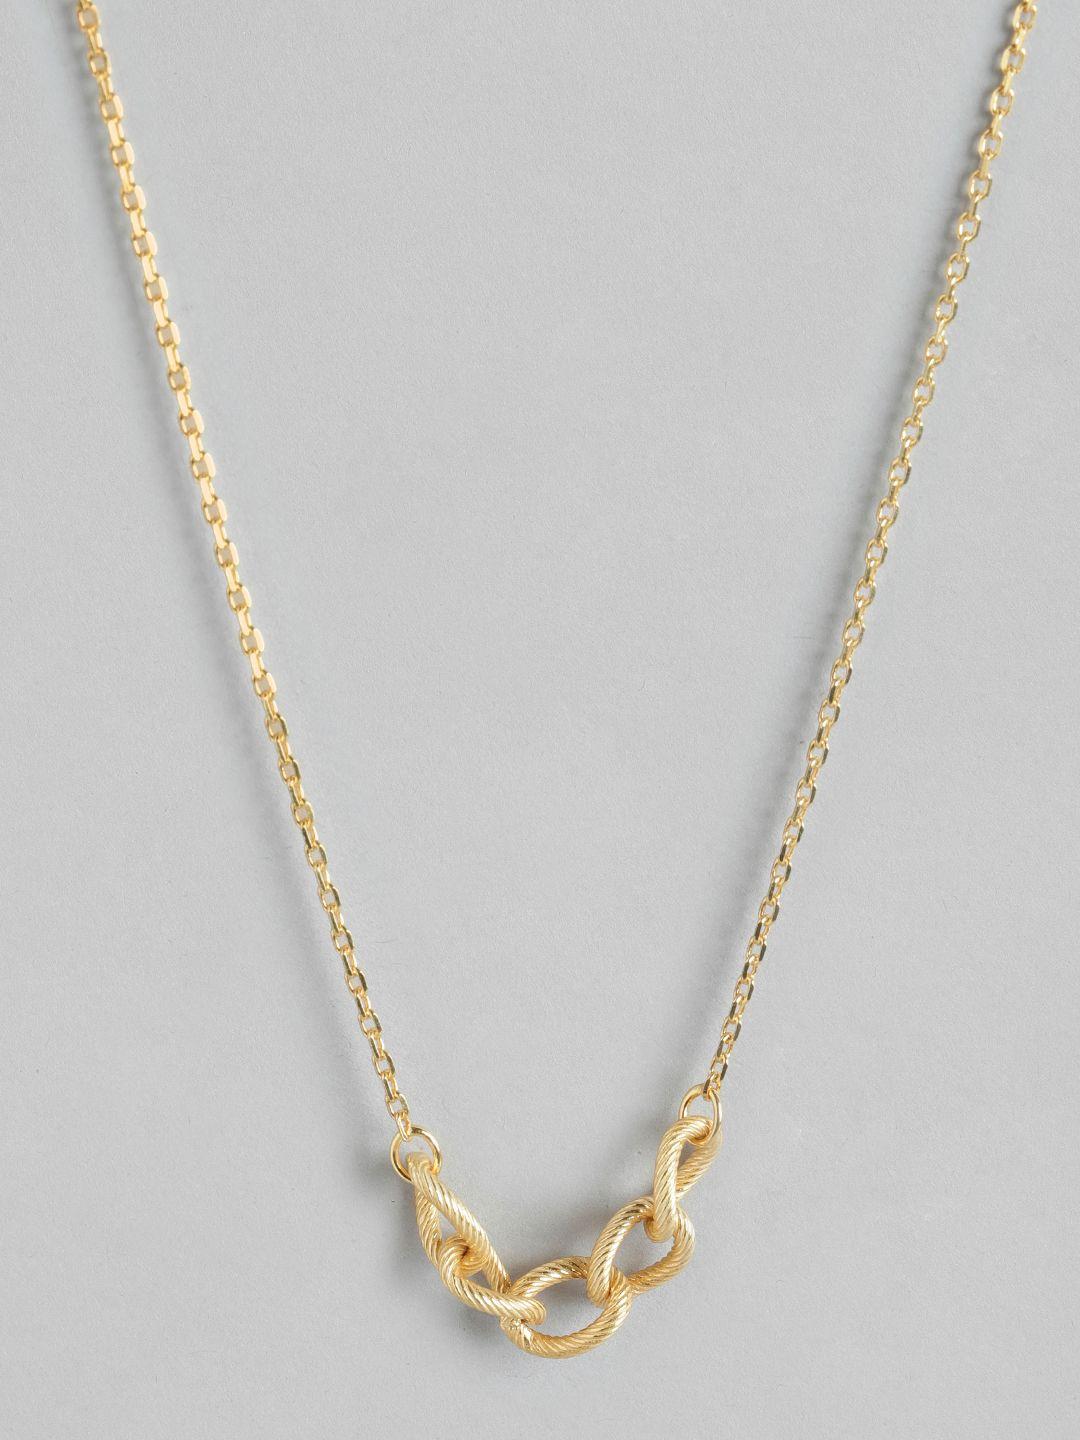 carlton-london-brass-gold-plated-necklace